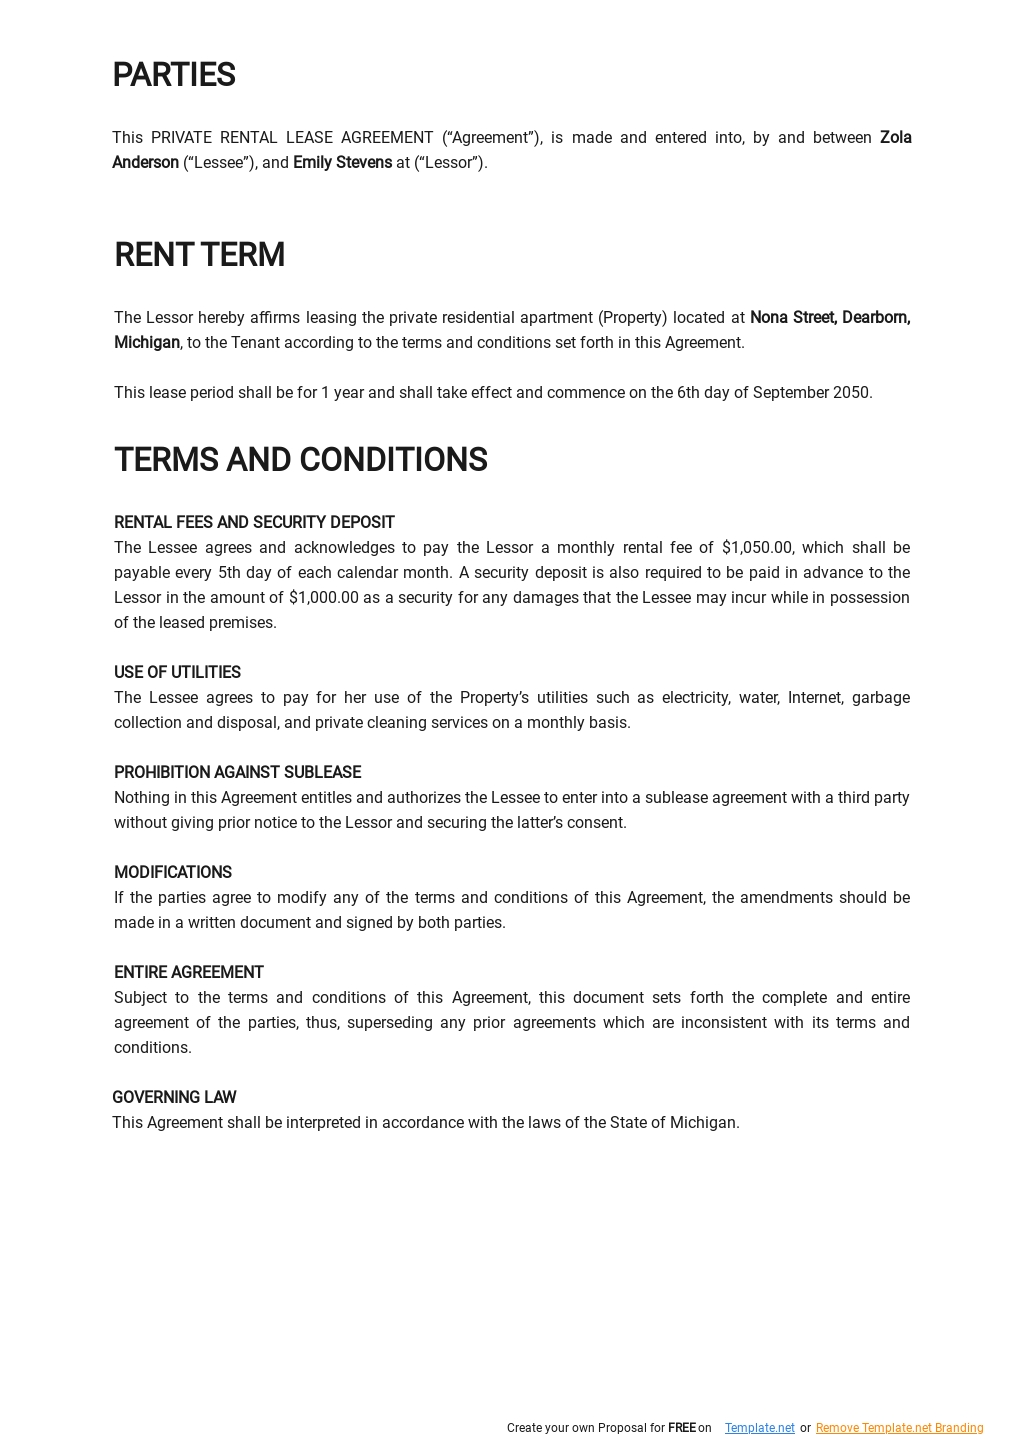 Private Rental Lease Agreement Template 1.jpe